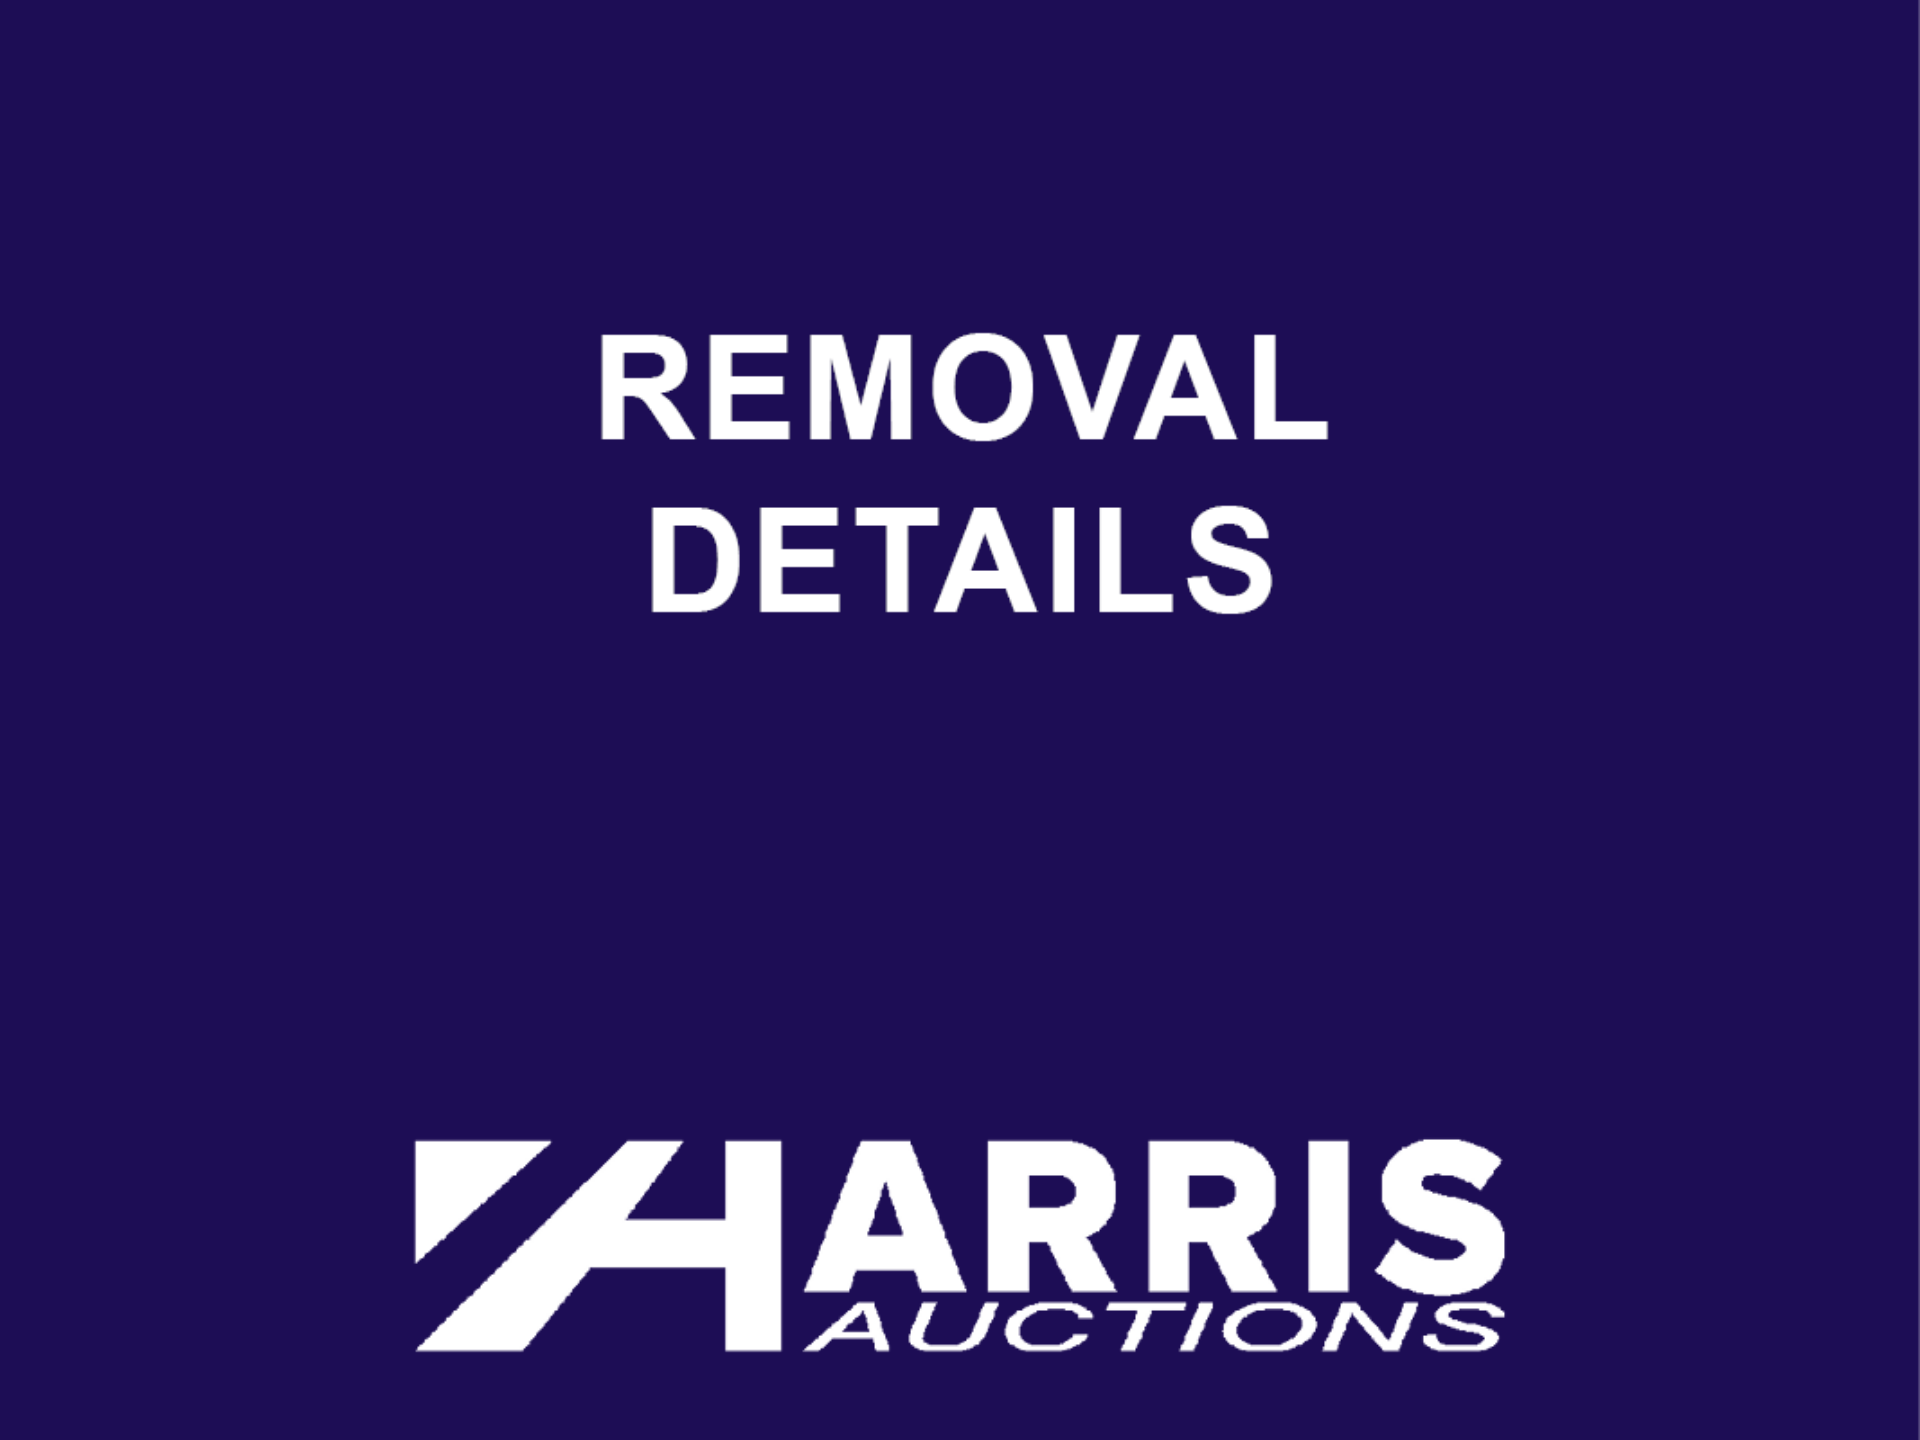 ALL ITEMS MUST BE REMOVED NO LATER THAN WEDNESDAY, FEBRUARY 28. REMOVALS BY APPOINTMENT ONLY. - Image 2 of 2